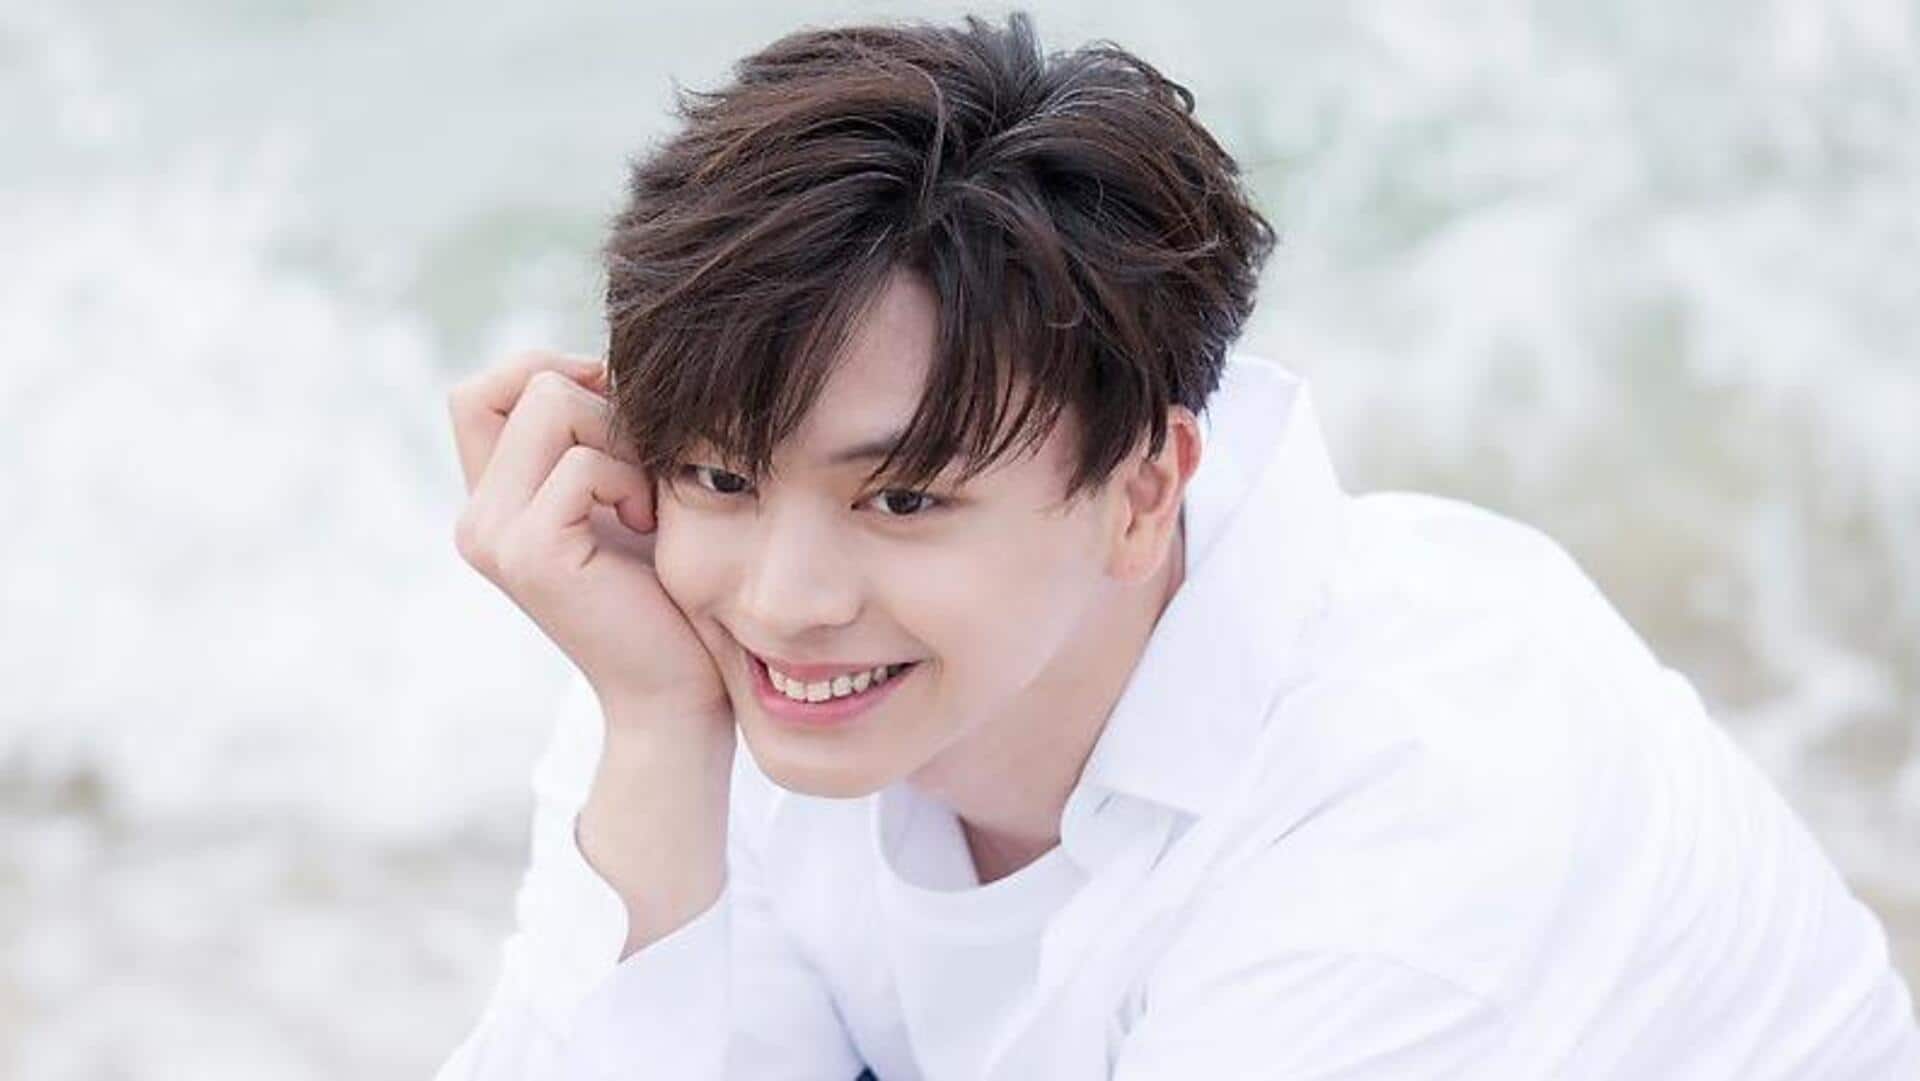 BTOB's Yook Sungjae signs with new agency: Check out statement